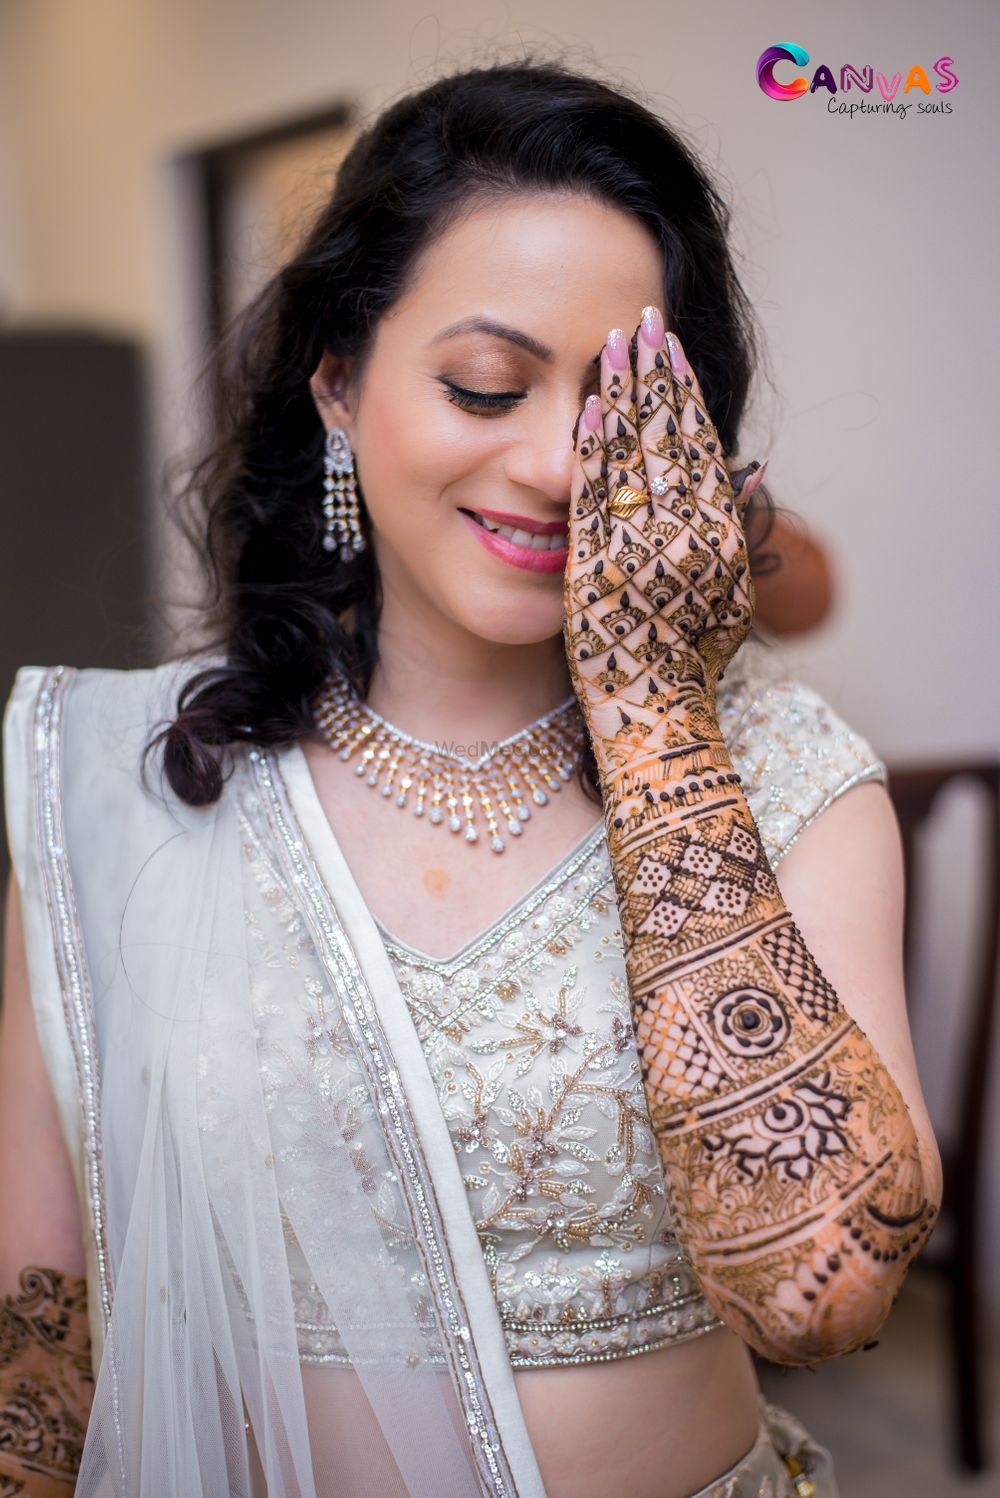 Photo From Mehendi - By Canvas- Capturing Souls